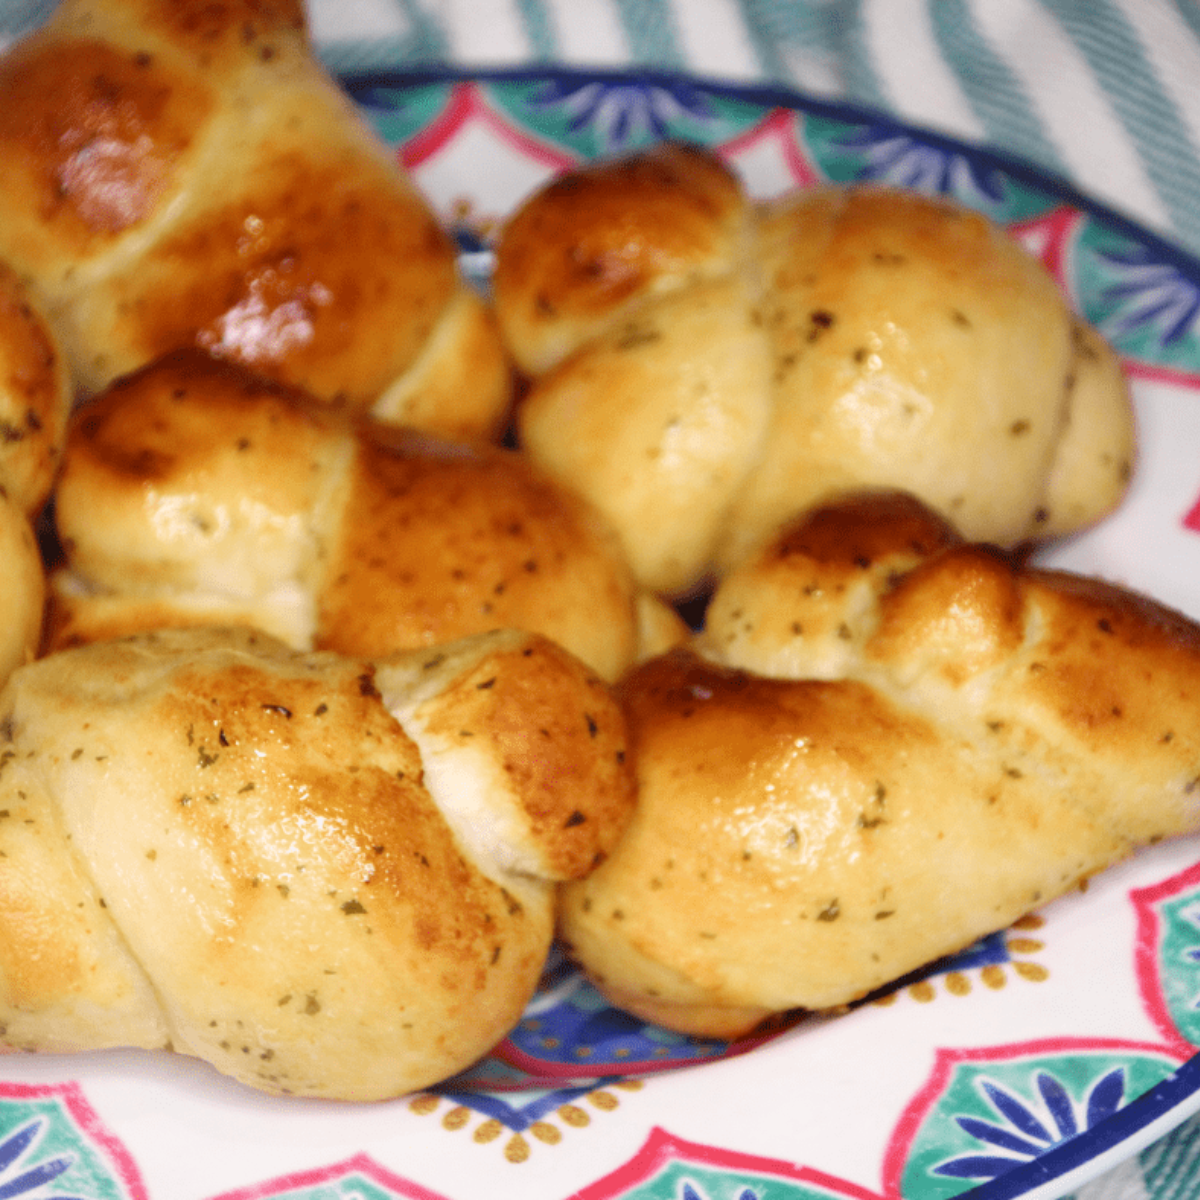 When preparing New York Bakery Garlic Knots in an Air Fryer, here are a few pro tips to ensure you get the best results:

Don't Overcrowd the Basket: This is important to ensure that the hot air can circulate properly and cook each garlic knot evenly. Overcrowding may lead to some knots being undercooked while others are overcooked.

Flip the Knots: Even though air fryers are known for their ability to cook food evenly due to the hot air circulation, flipping the knots halfway ensures a uniformly crispy and golden exterior.

Adjust Cooking Time: The cooking times mentioned in recipes are usually an estimate. Depending on your specific air fryer model, you may need to adjust cooking times slightly. Always keep a close eye on the knots during the final minutes of cooking to prevent them from burning.

Keep It Hot: For the best results, serve the garlic knots immediately after cooking while they are still hot and crispy. If you need to reheat them, popping them back in the air fryer for a minute or two can help regain some crispiness.

Experiment with Flavors: Don't be afraid to experiment with different seasonings. For example, you might want to try adding a sprinkle of chili flakes for some heat, or some grated cheddar cheese for extra richness.

Use Fresh Ingredients for Garnishing: If you're adding a garnish, try to use fresh ingredients. Freshly chopped parsley or freshly grated parmesan cheese can make a big difference in flavor compared to dried or pre-packaged versions.

Make a Dipping Sauce: While these garlic knots are delicious on their own, consider serving them with a side of marinara sauce for dipping. It complements the rich garlic and butter flavors beautifully.